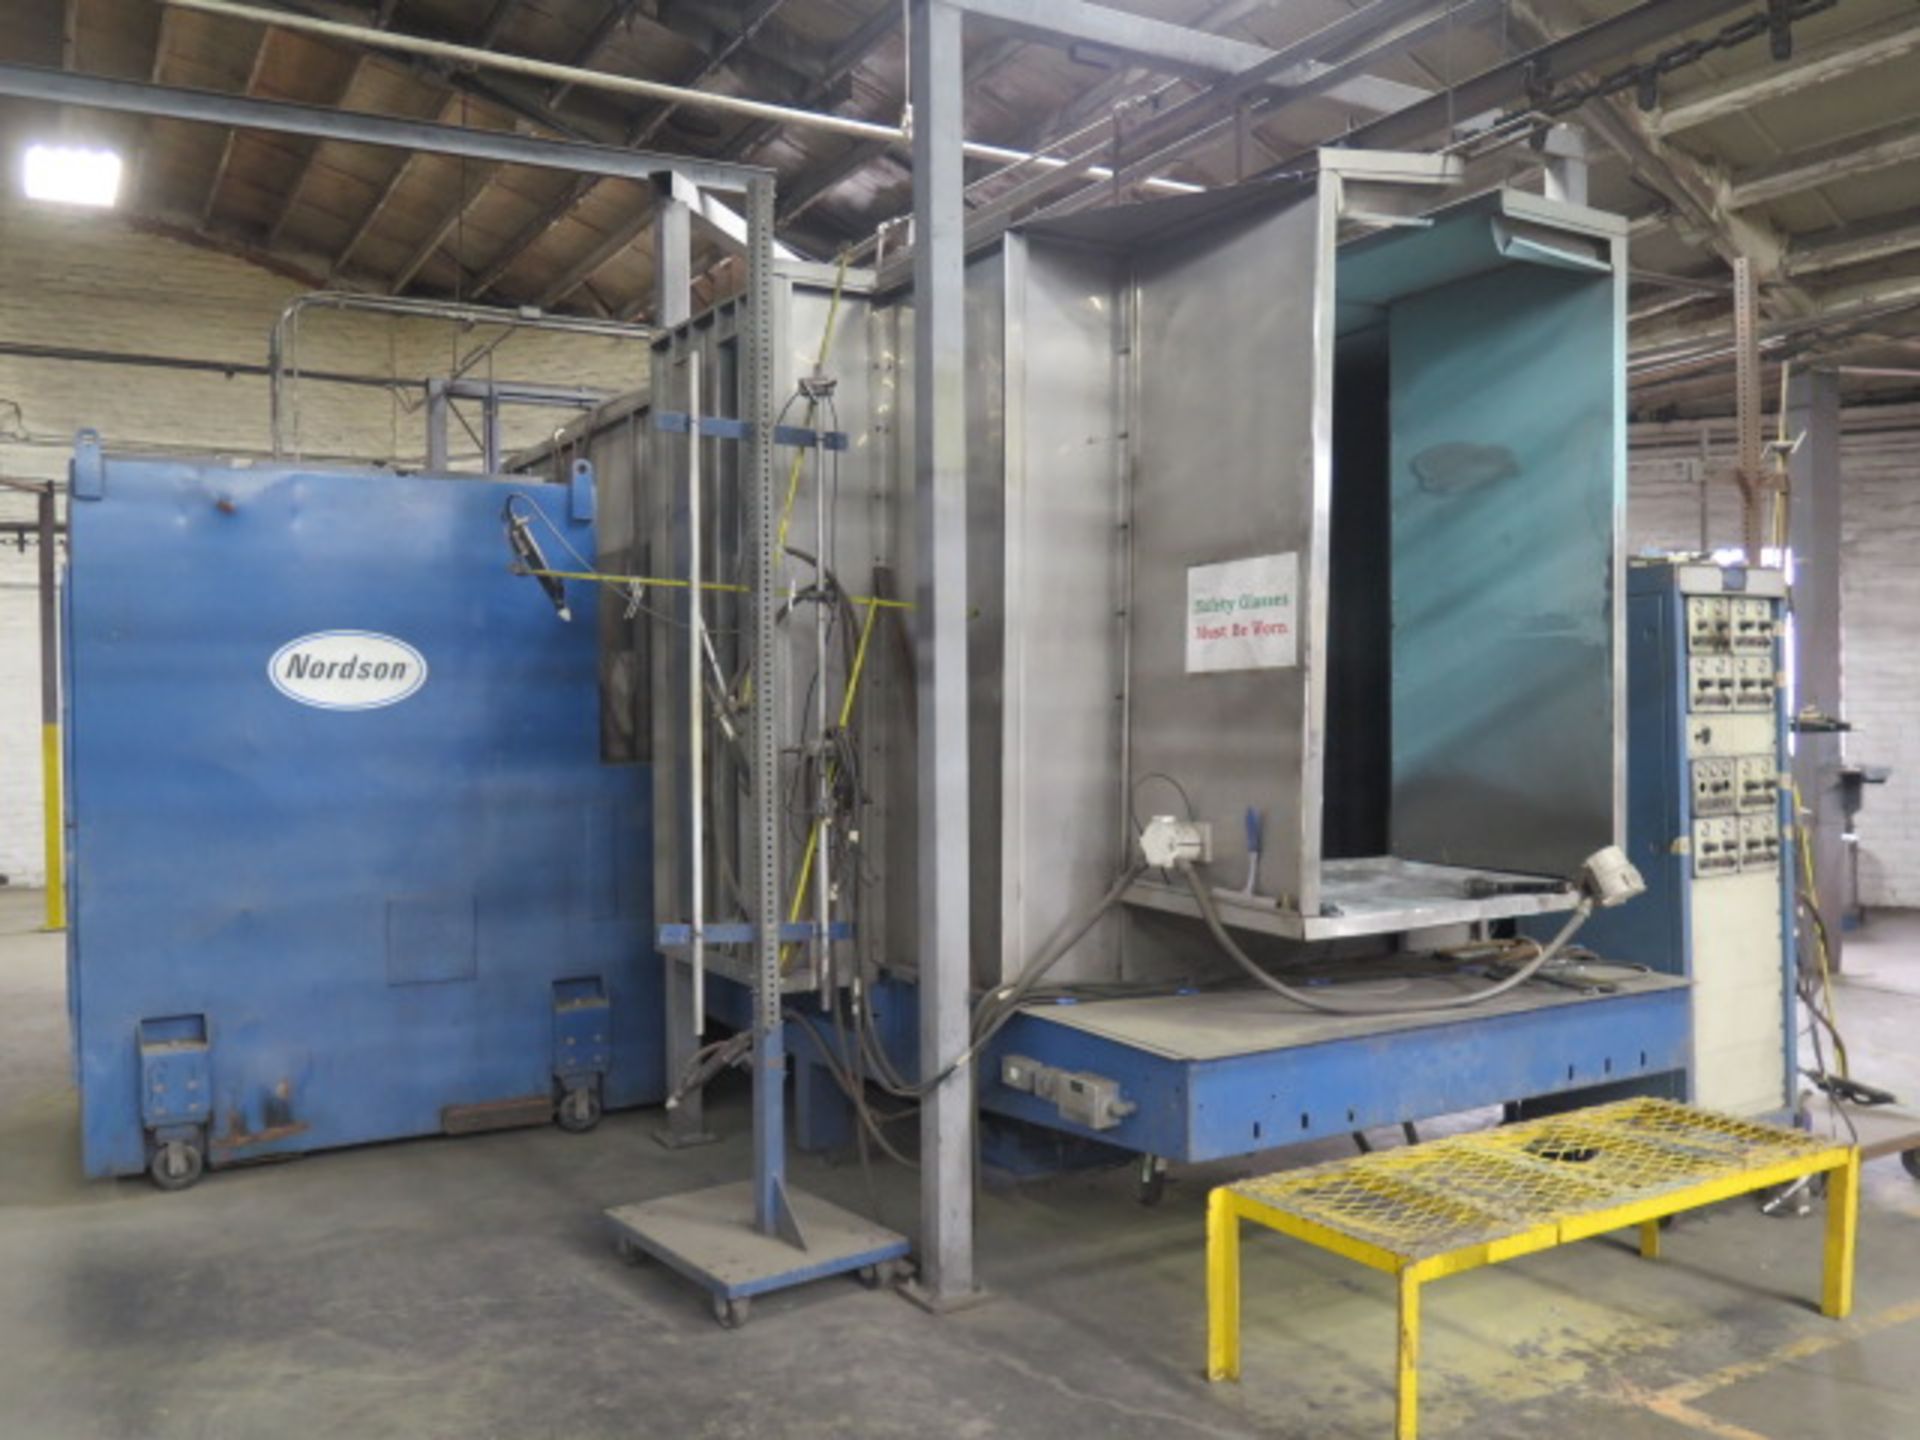 Nordson CK-05 Powder Coating System w/ 20’W x 25’L x 9’6”H Booth, (14) 13” Dia x 36”L Primary - Image 3 of 16